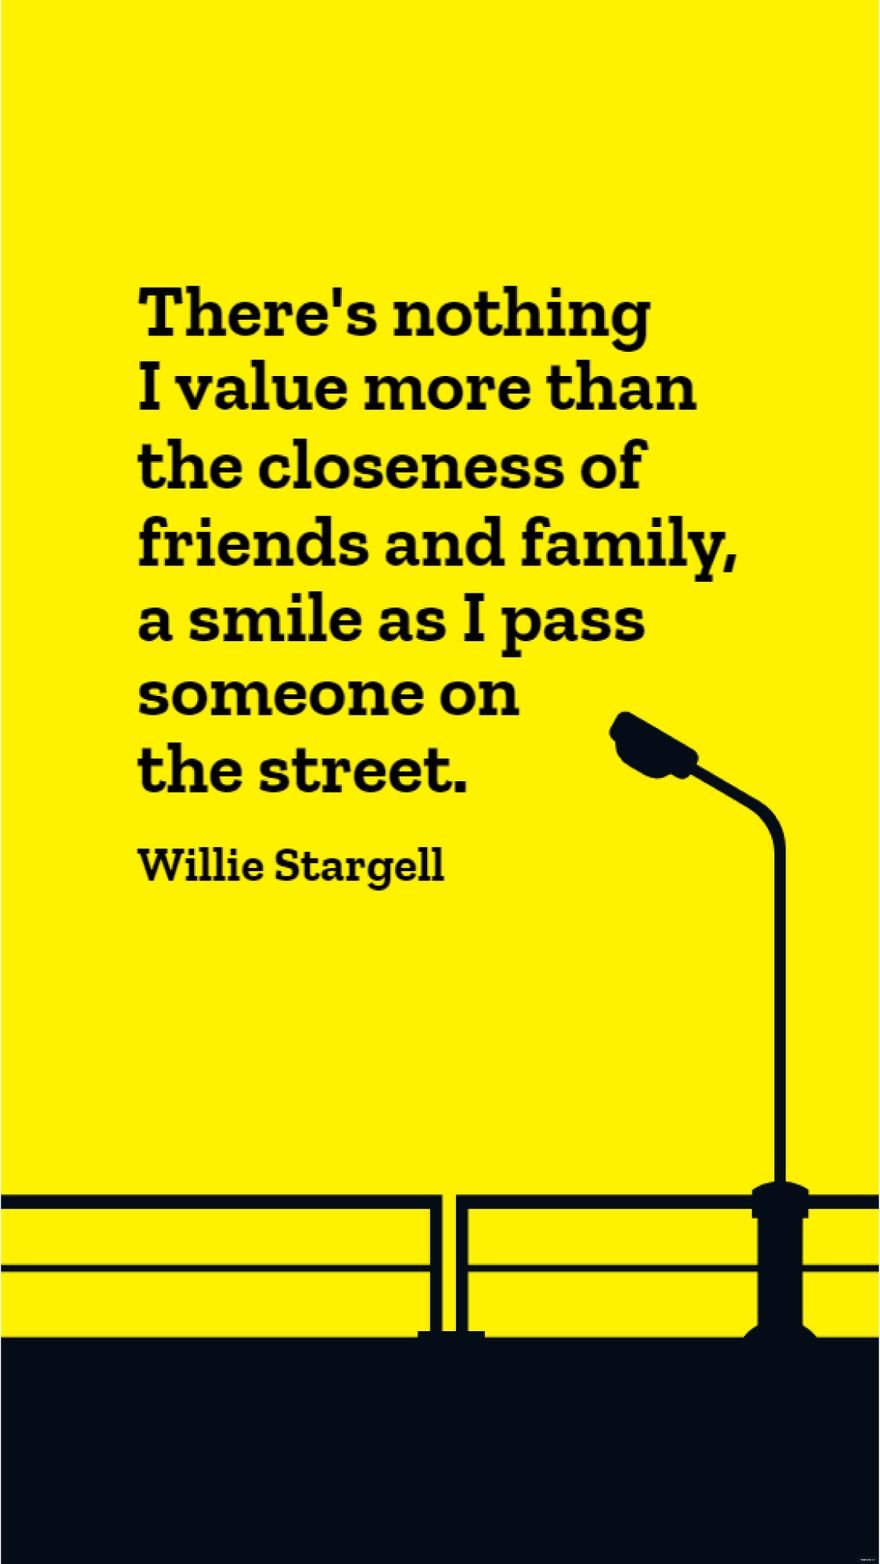 Willie Stargell - There's nothing I value more than the closeness of friends and family, a smile as I pass someone on the street.